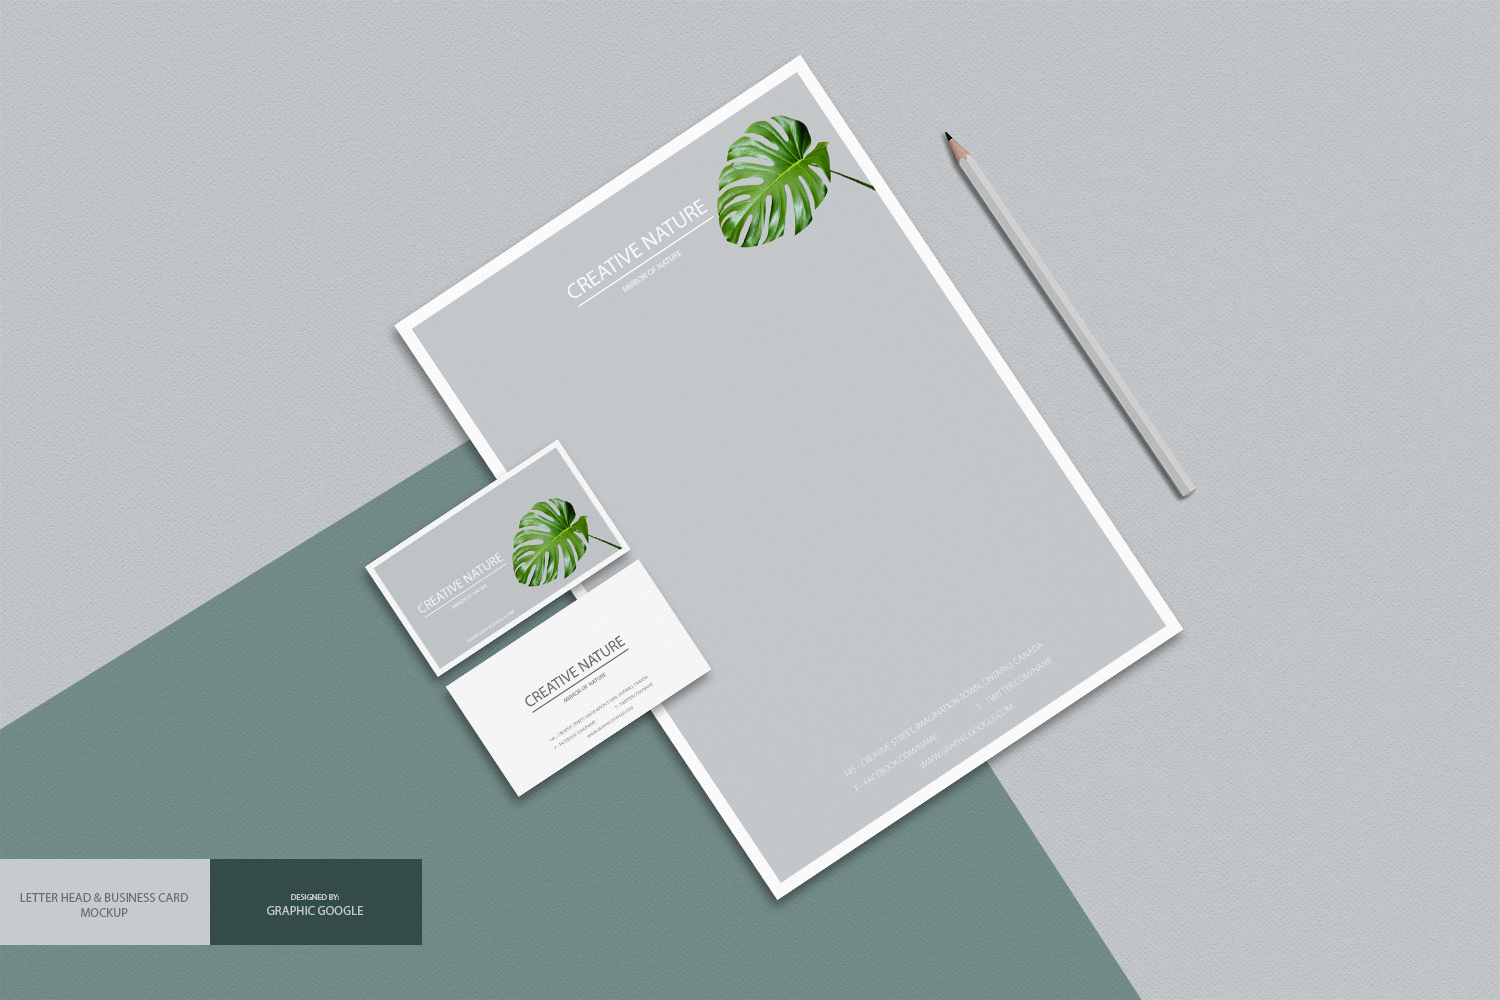 Free Business Cards PSD Mockup